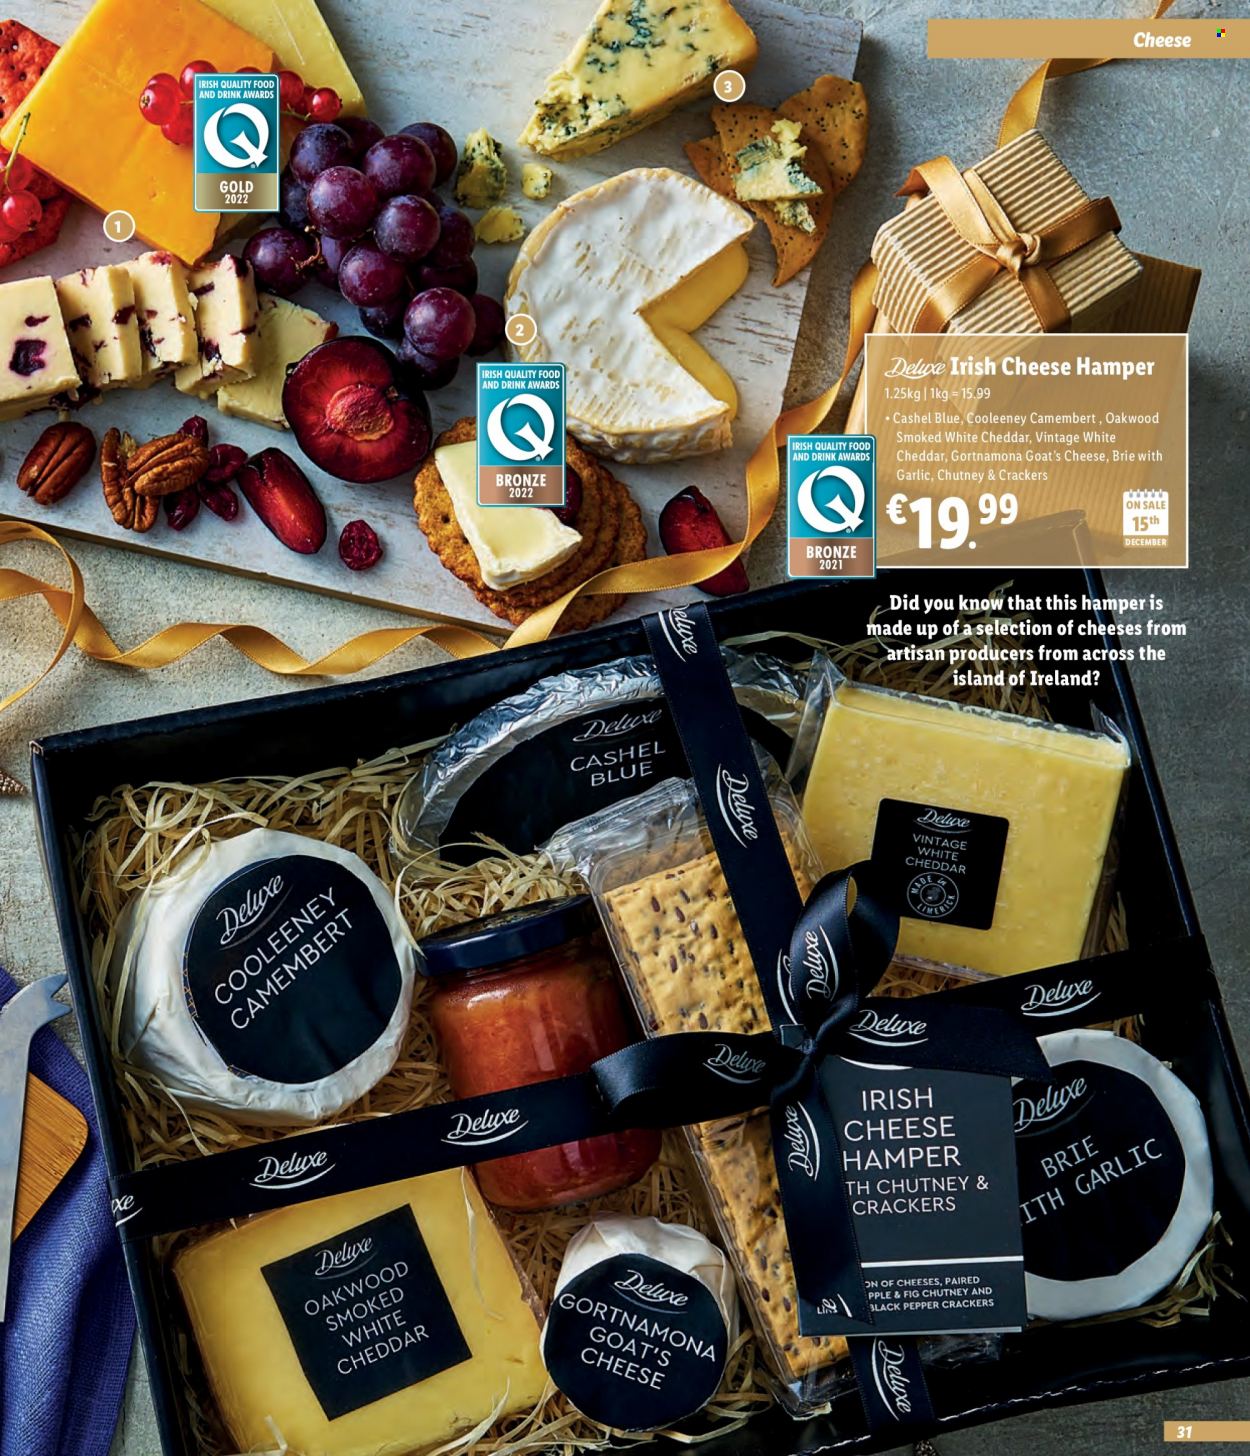 thumbnail - Lidl offer  - Sales products - hamper, camembert, cheddar, cheese, brie, crackers, black pepper, chutney. Page 31.